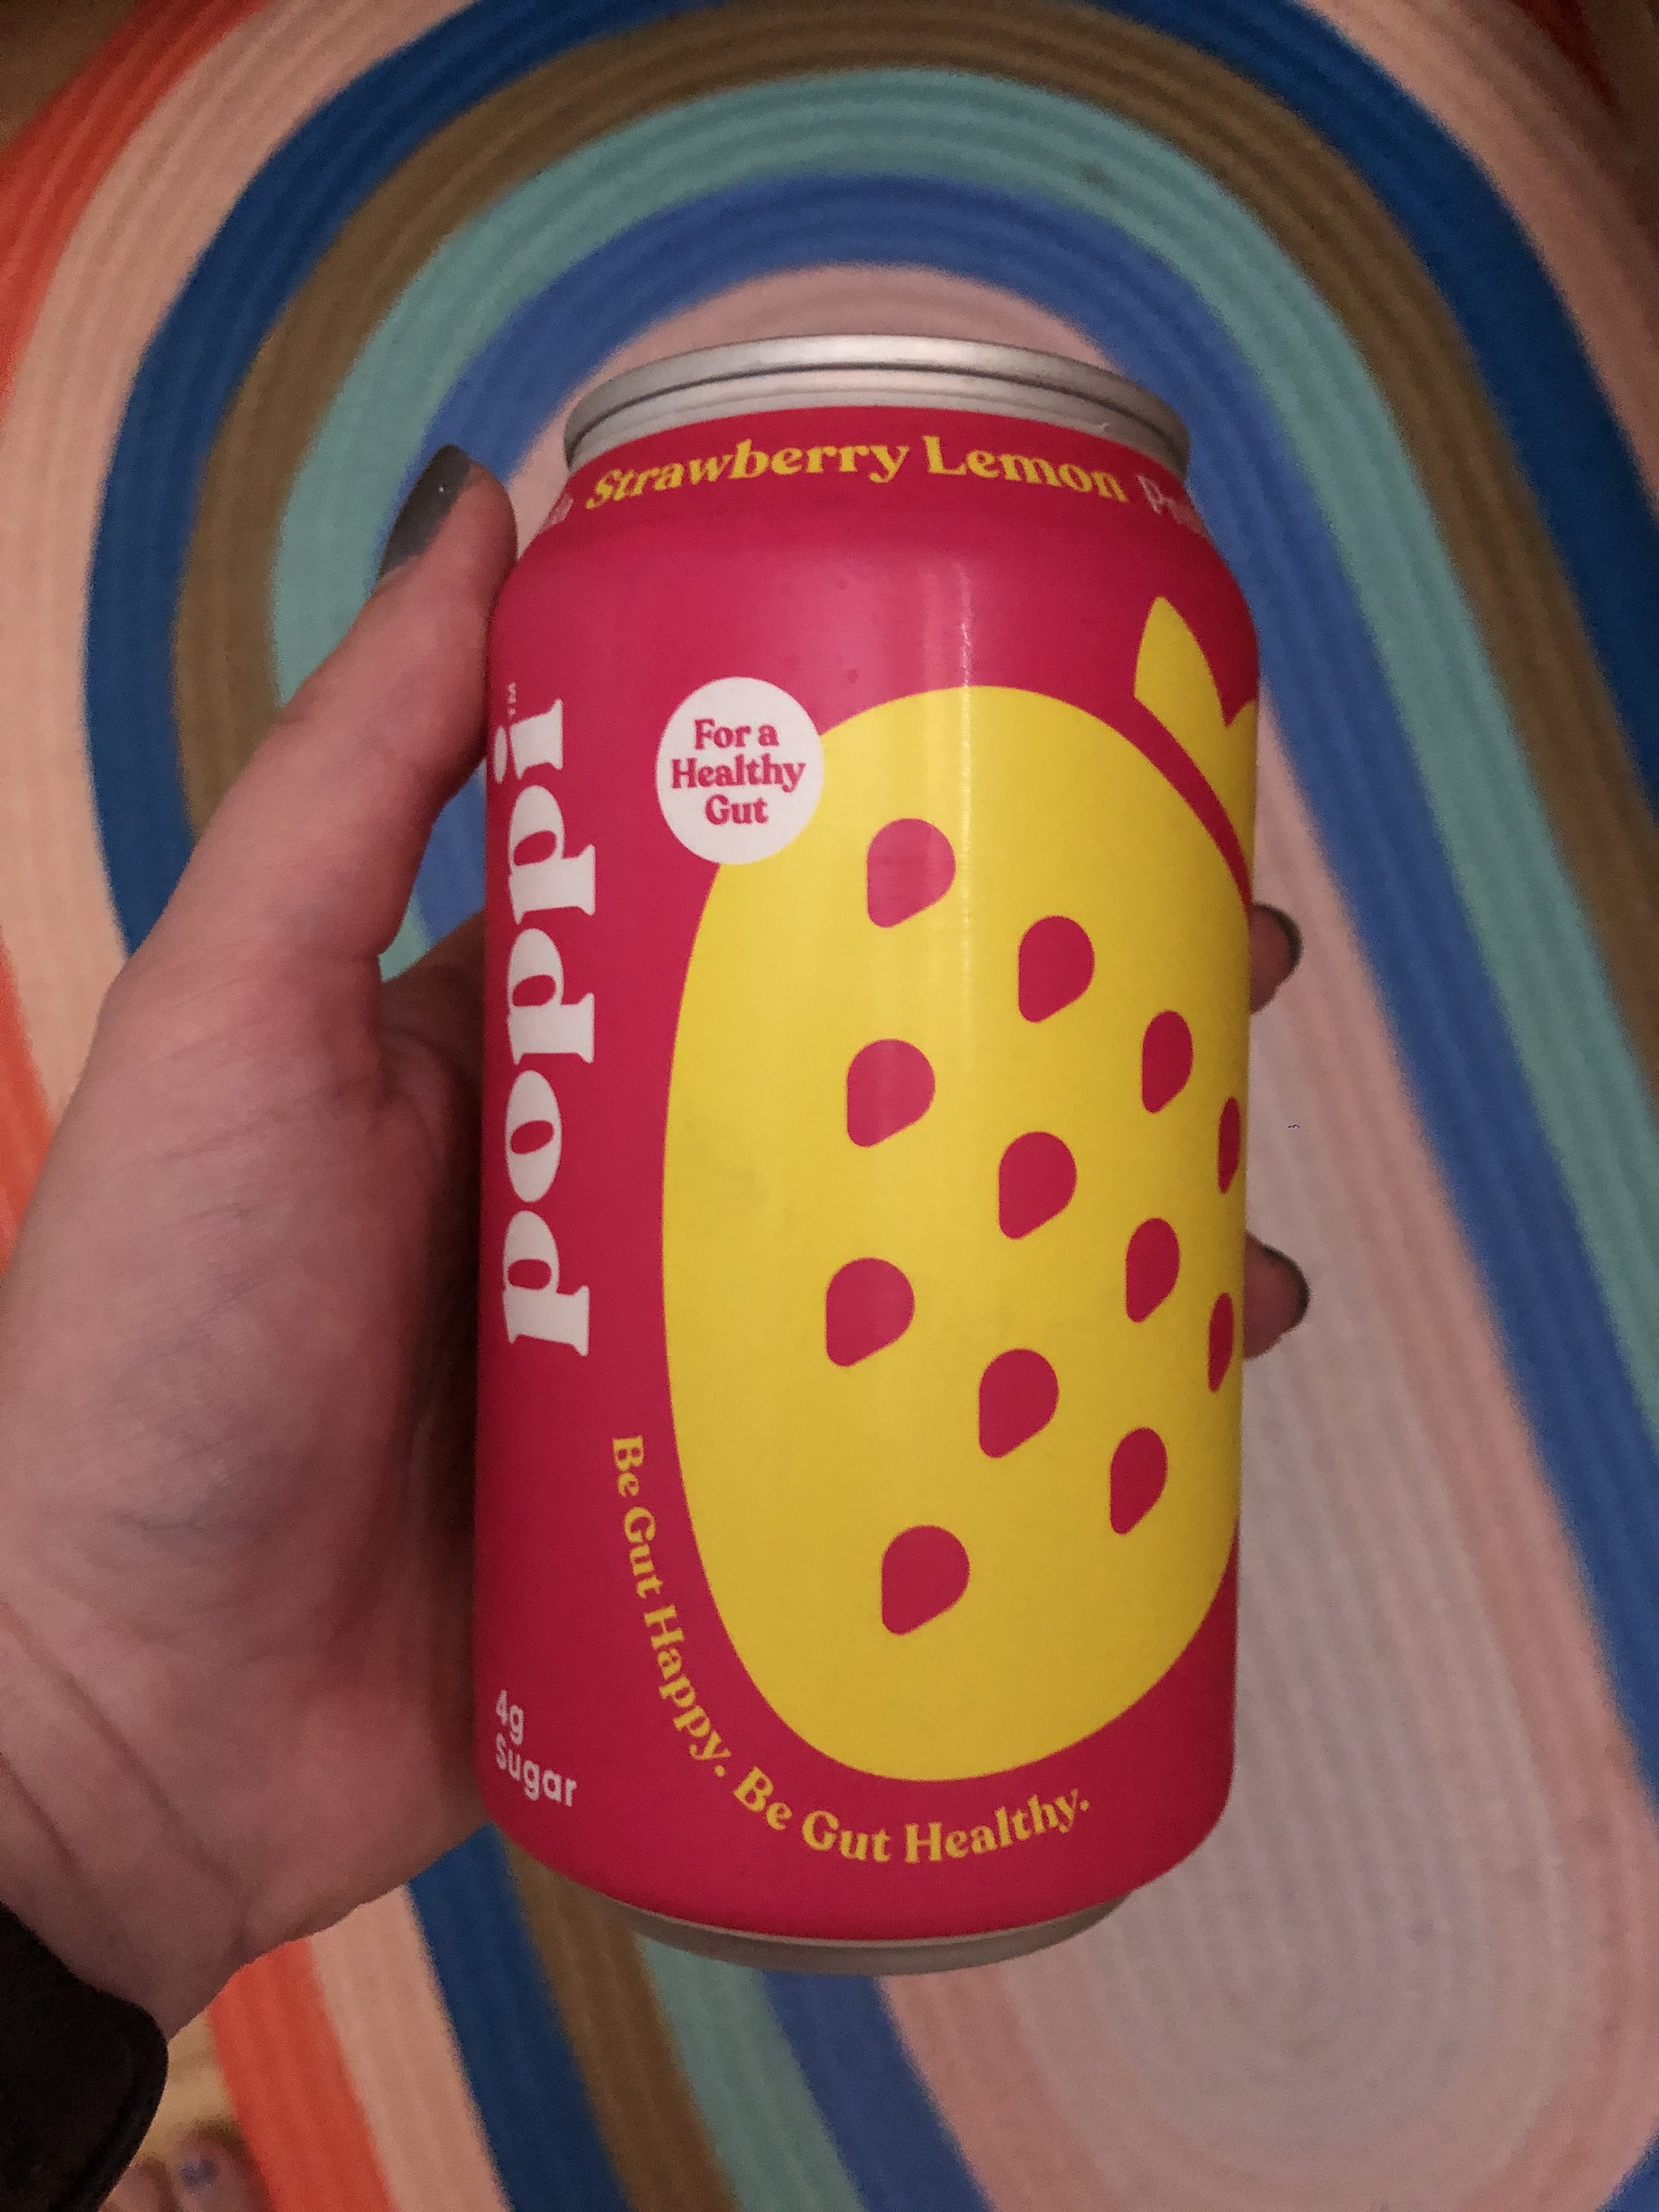 Hand holding the can of strawberry lemonade soda